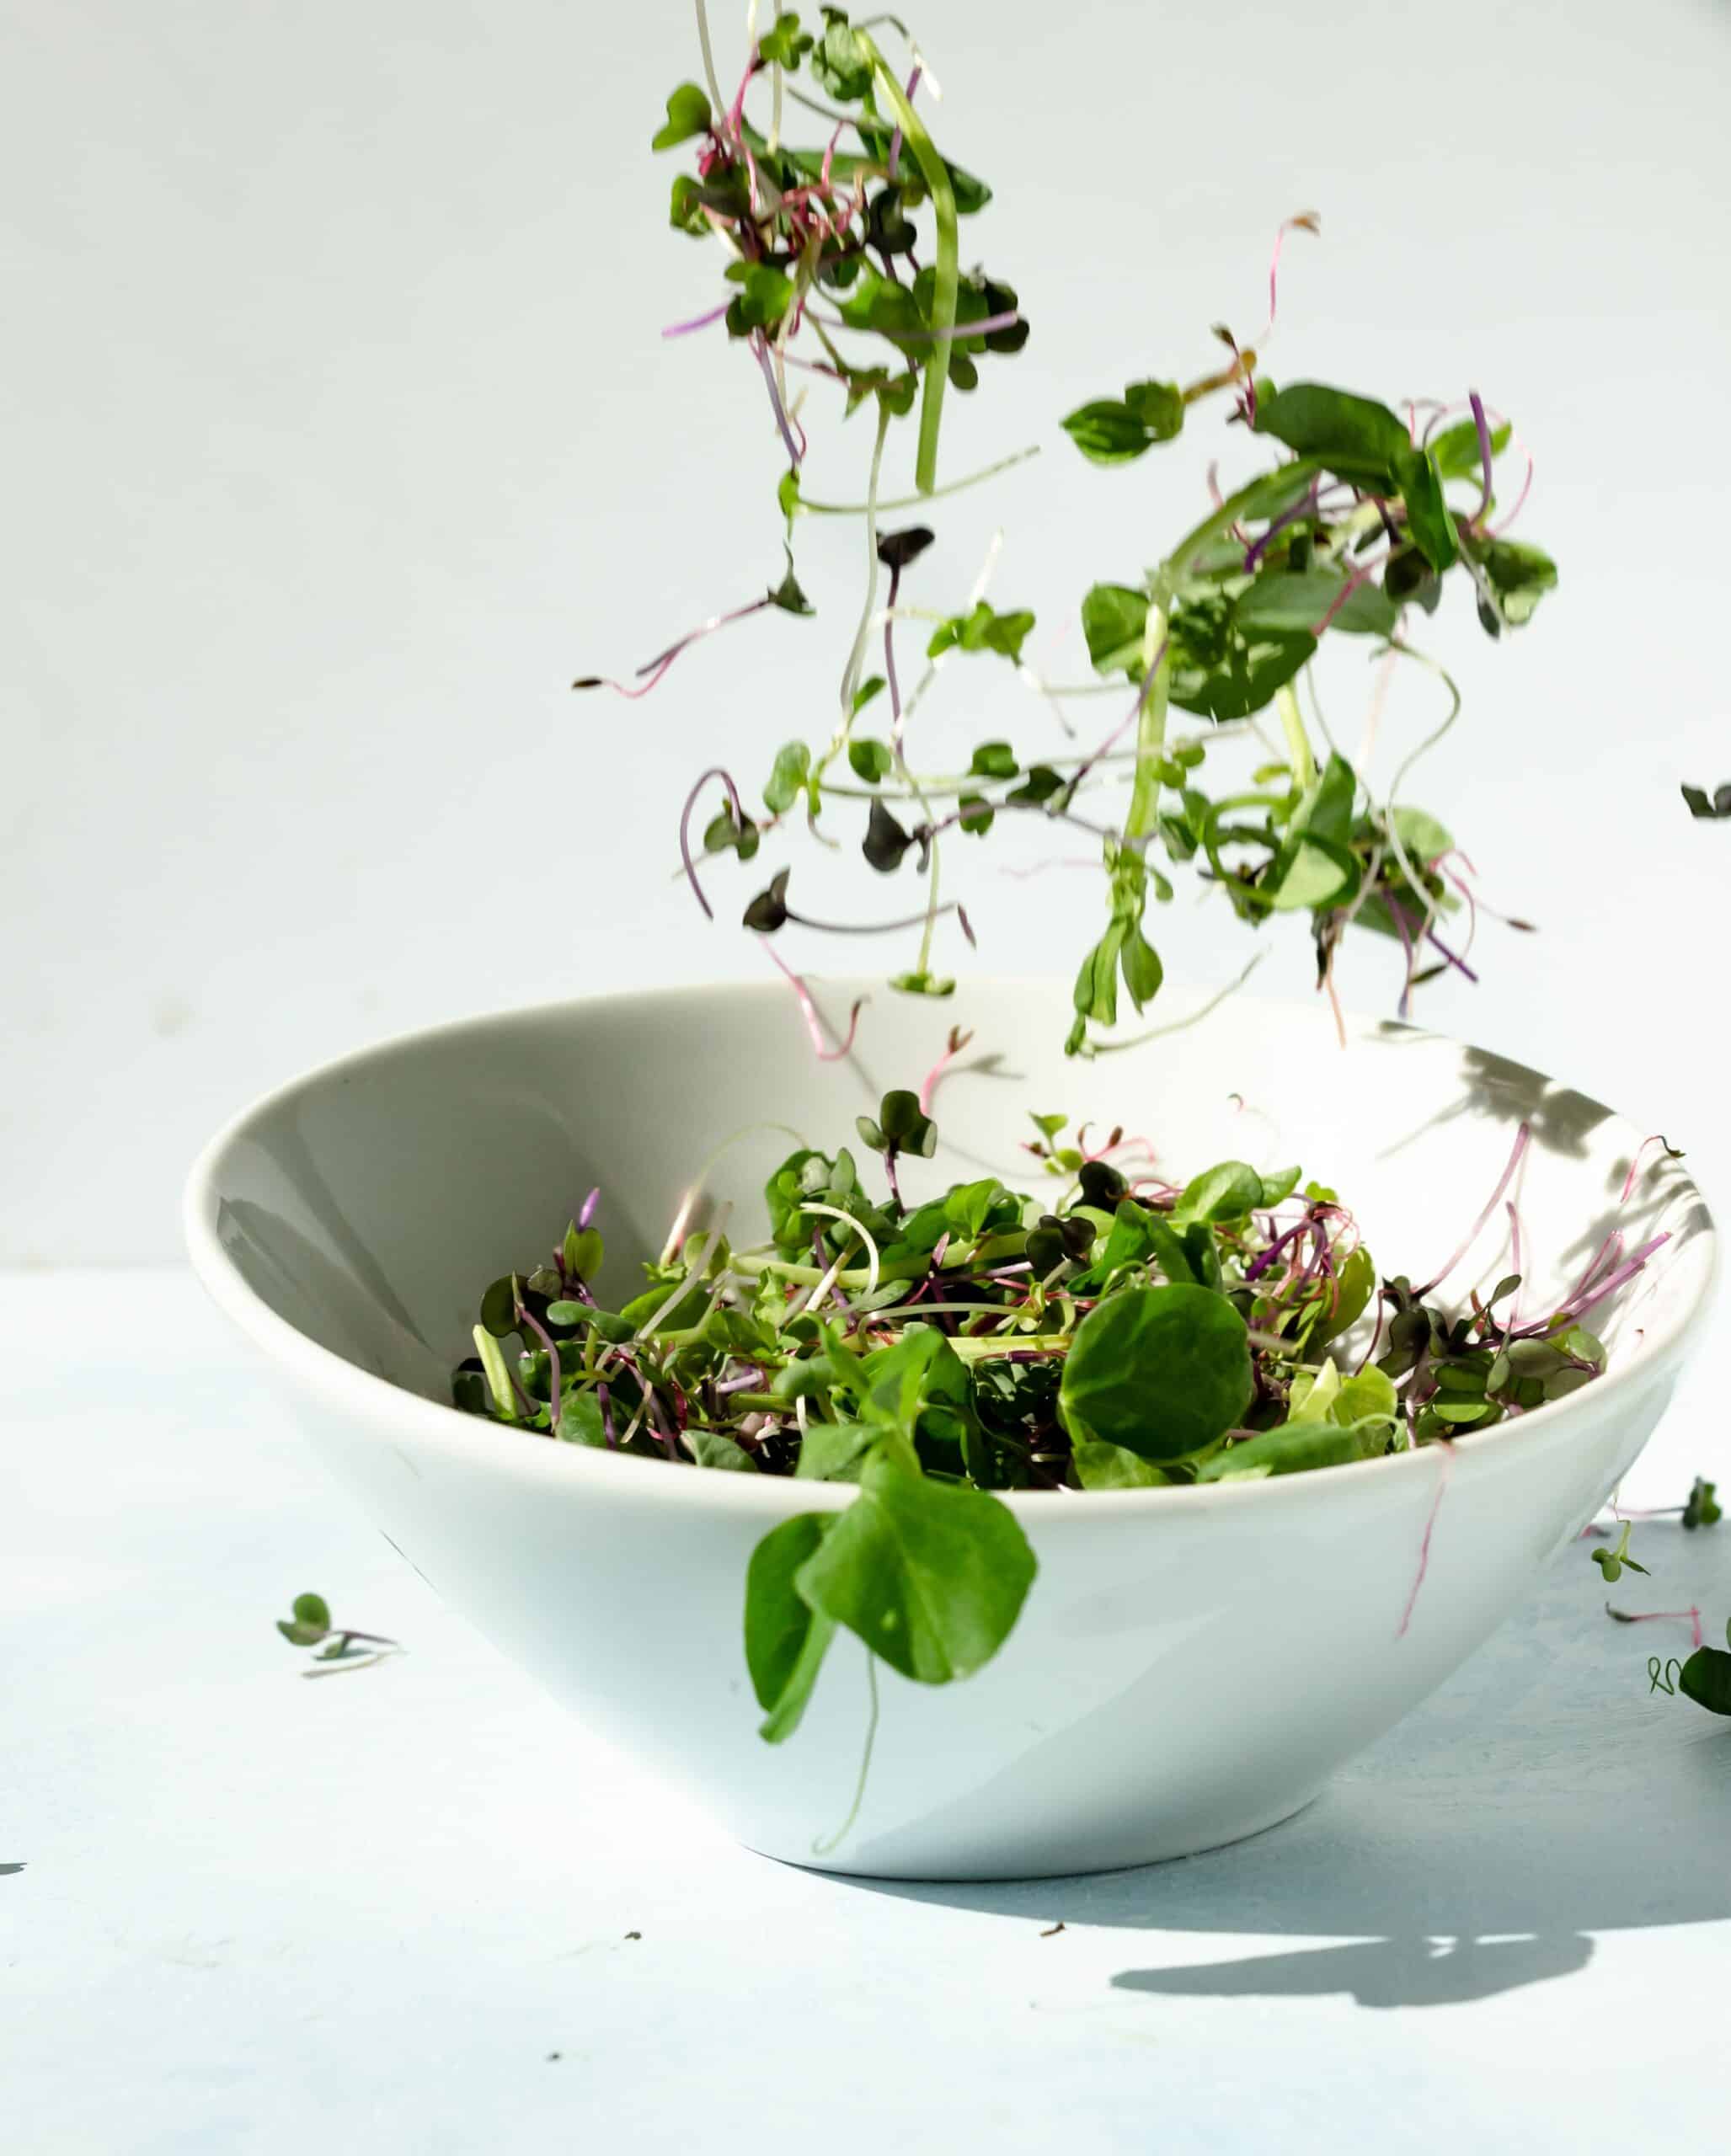 A white bowl with microgreens spilling into it on a white surface